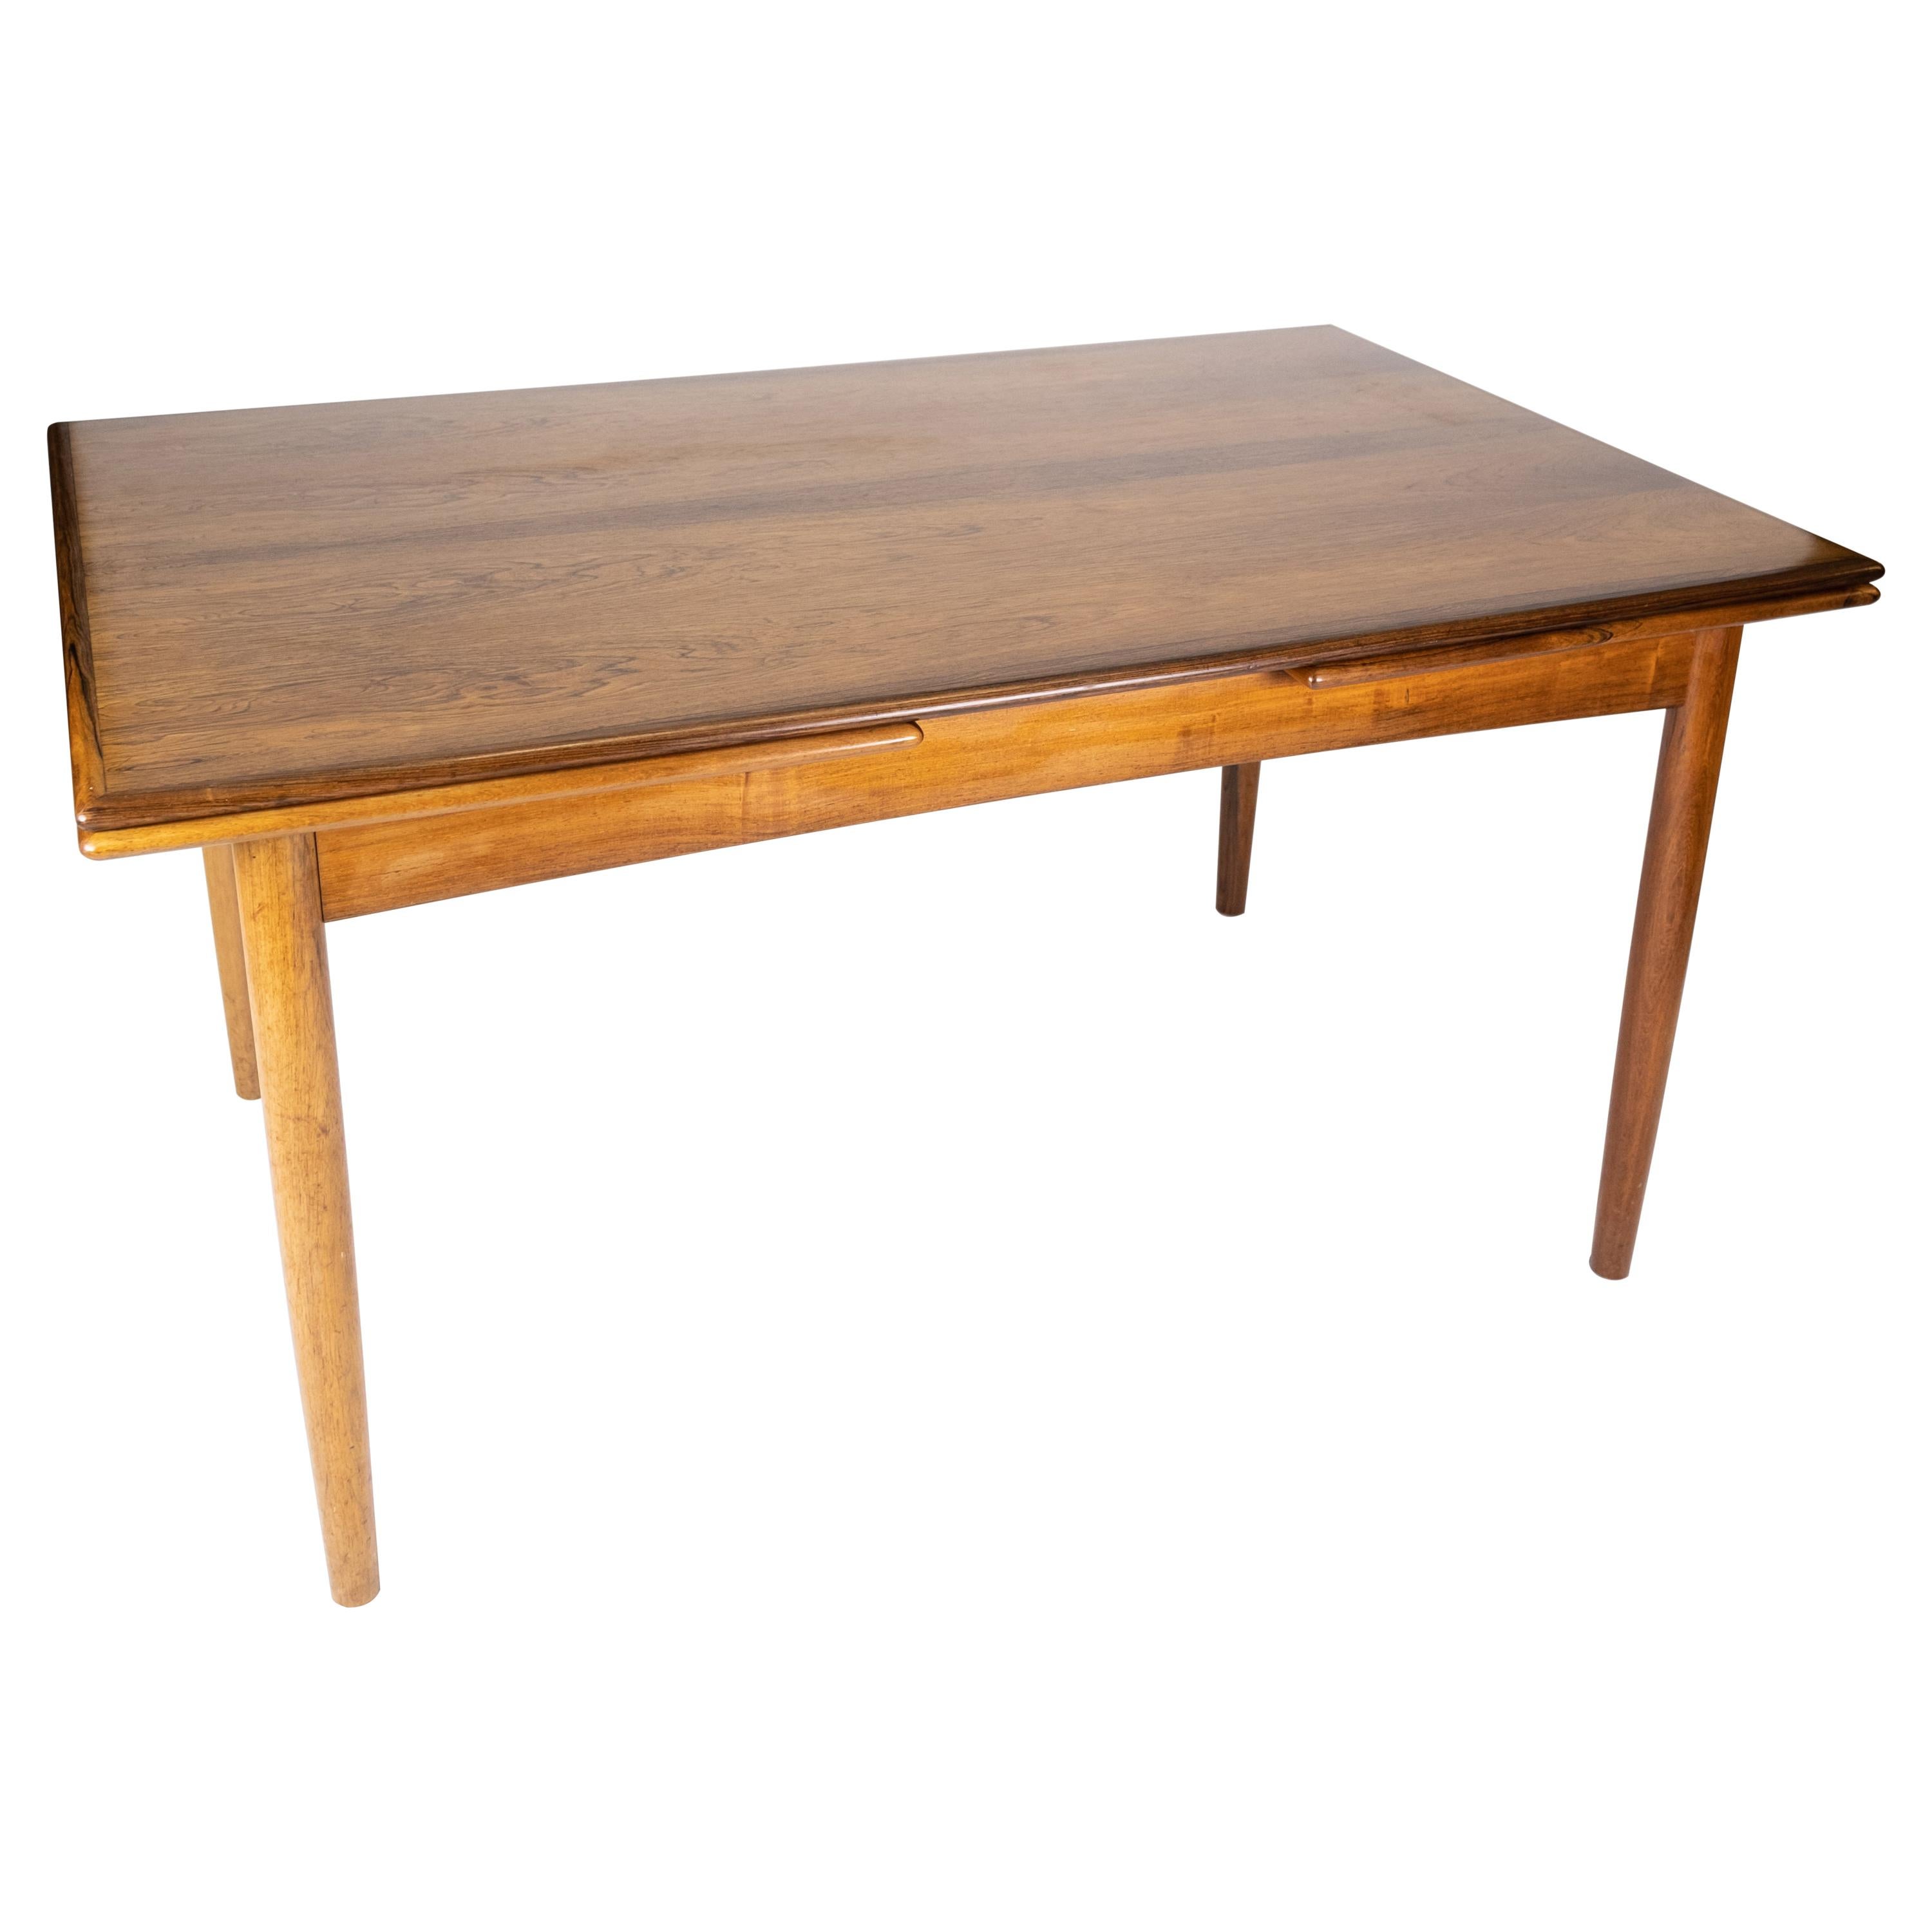 Dining Table Made In Rosewood With Extensions, Danish Design From 1960s For Sale